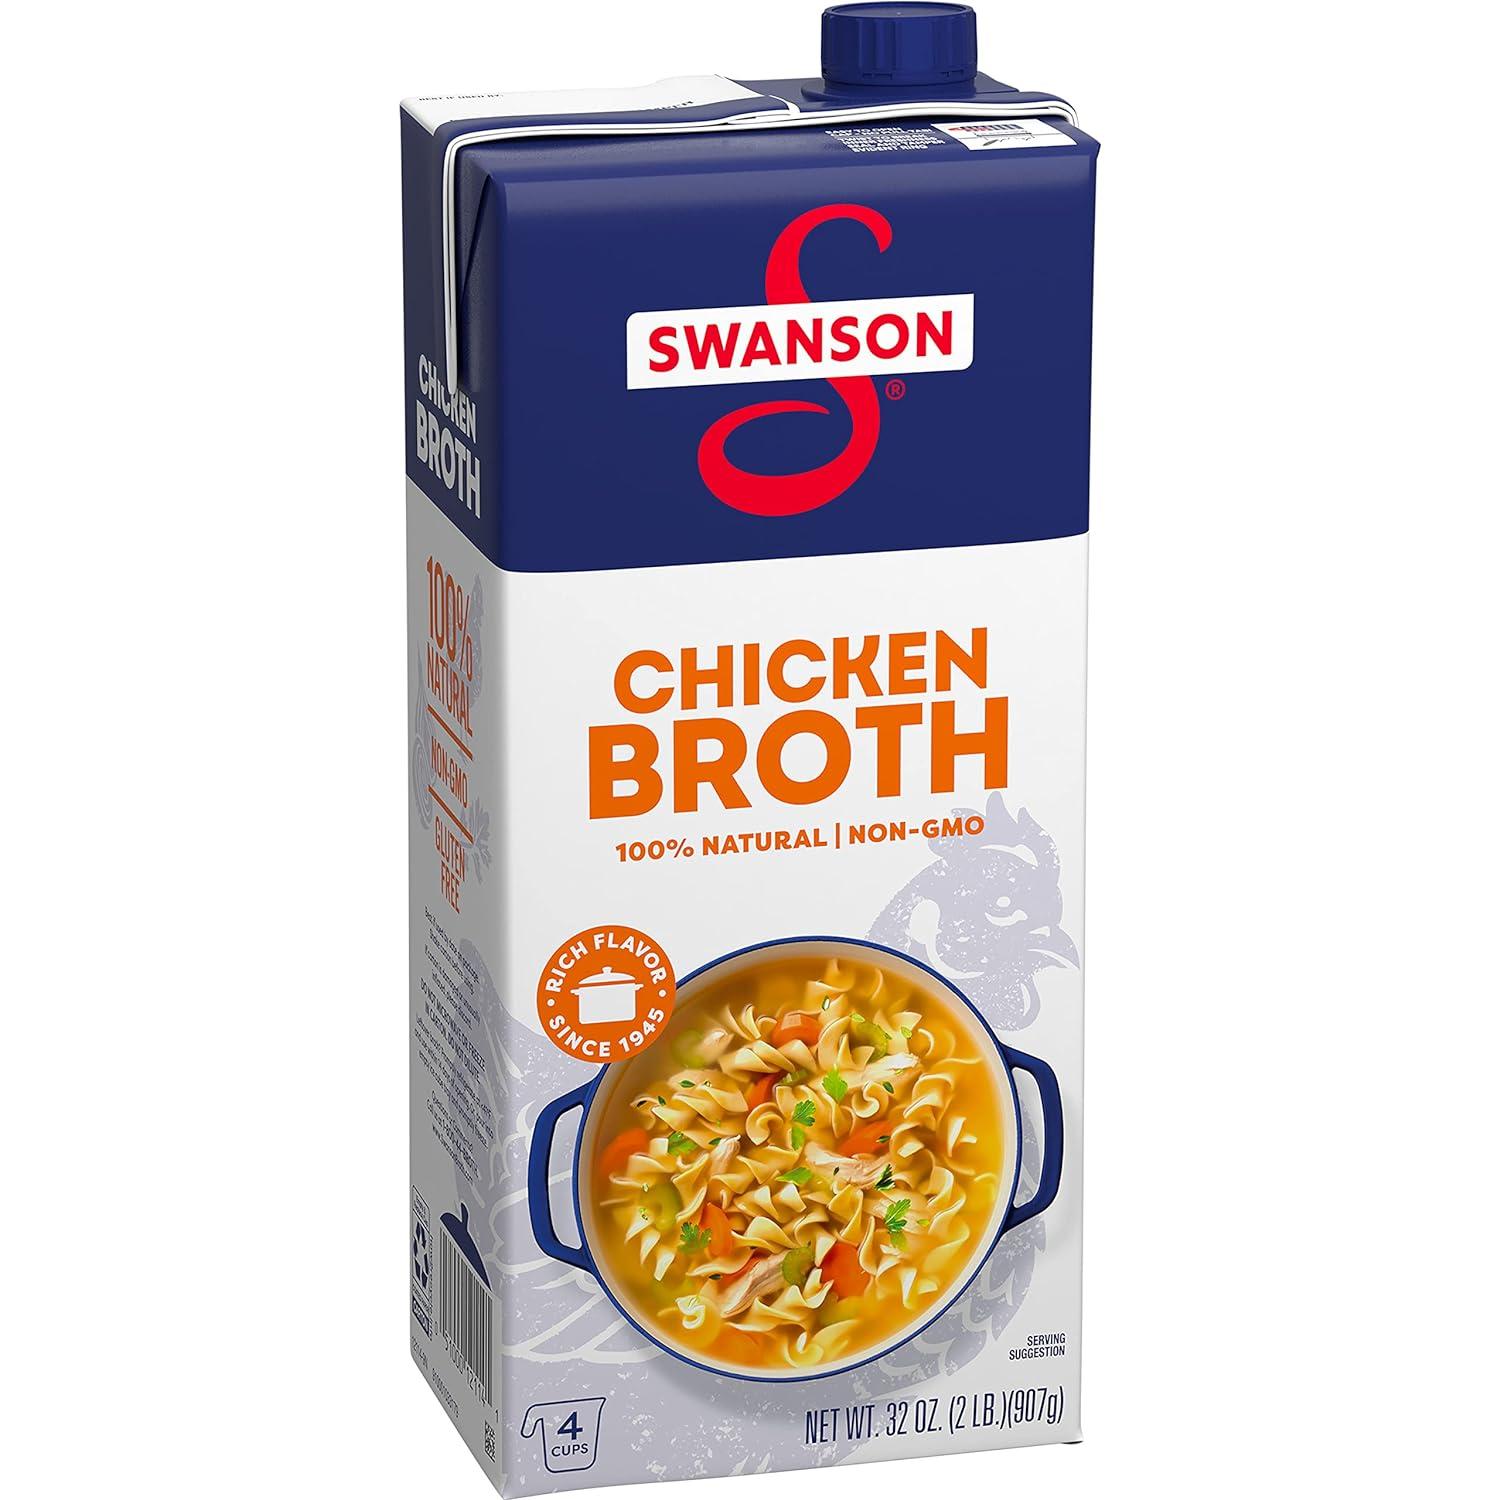 Swanson Natural Chicken Broth for $1.48